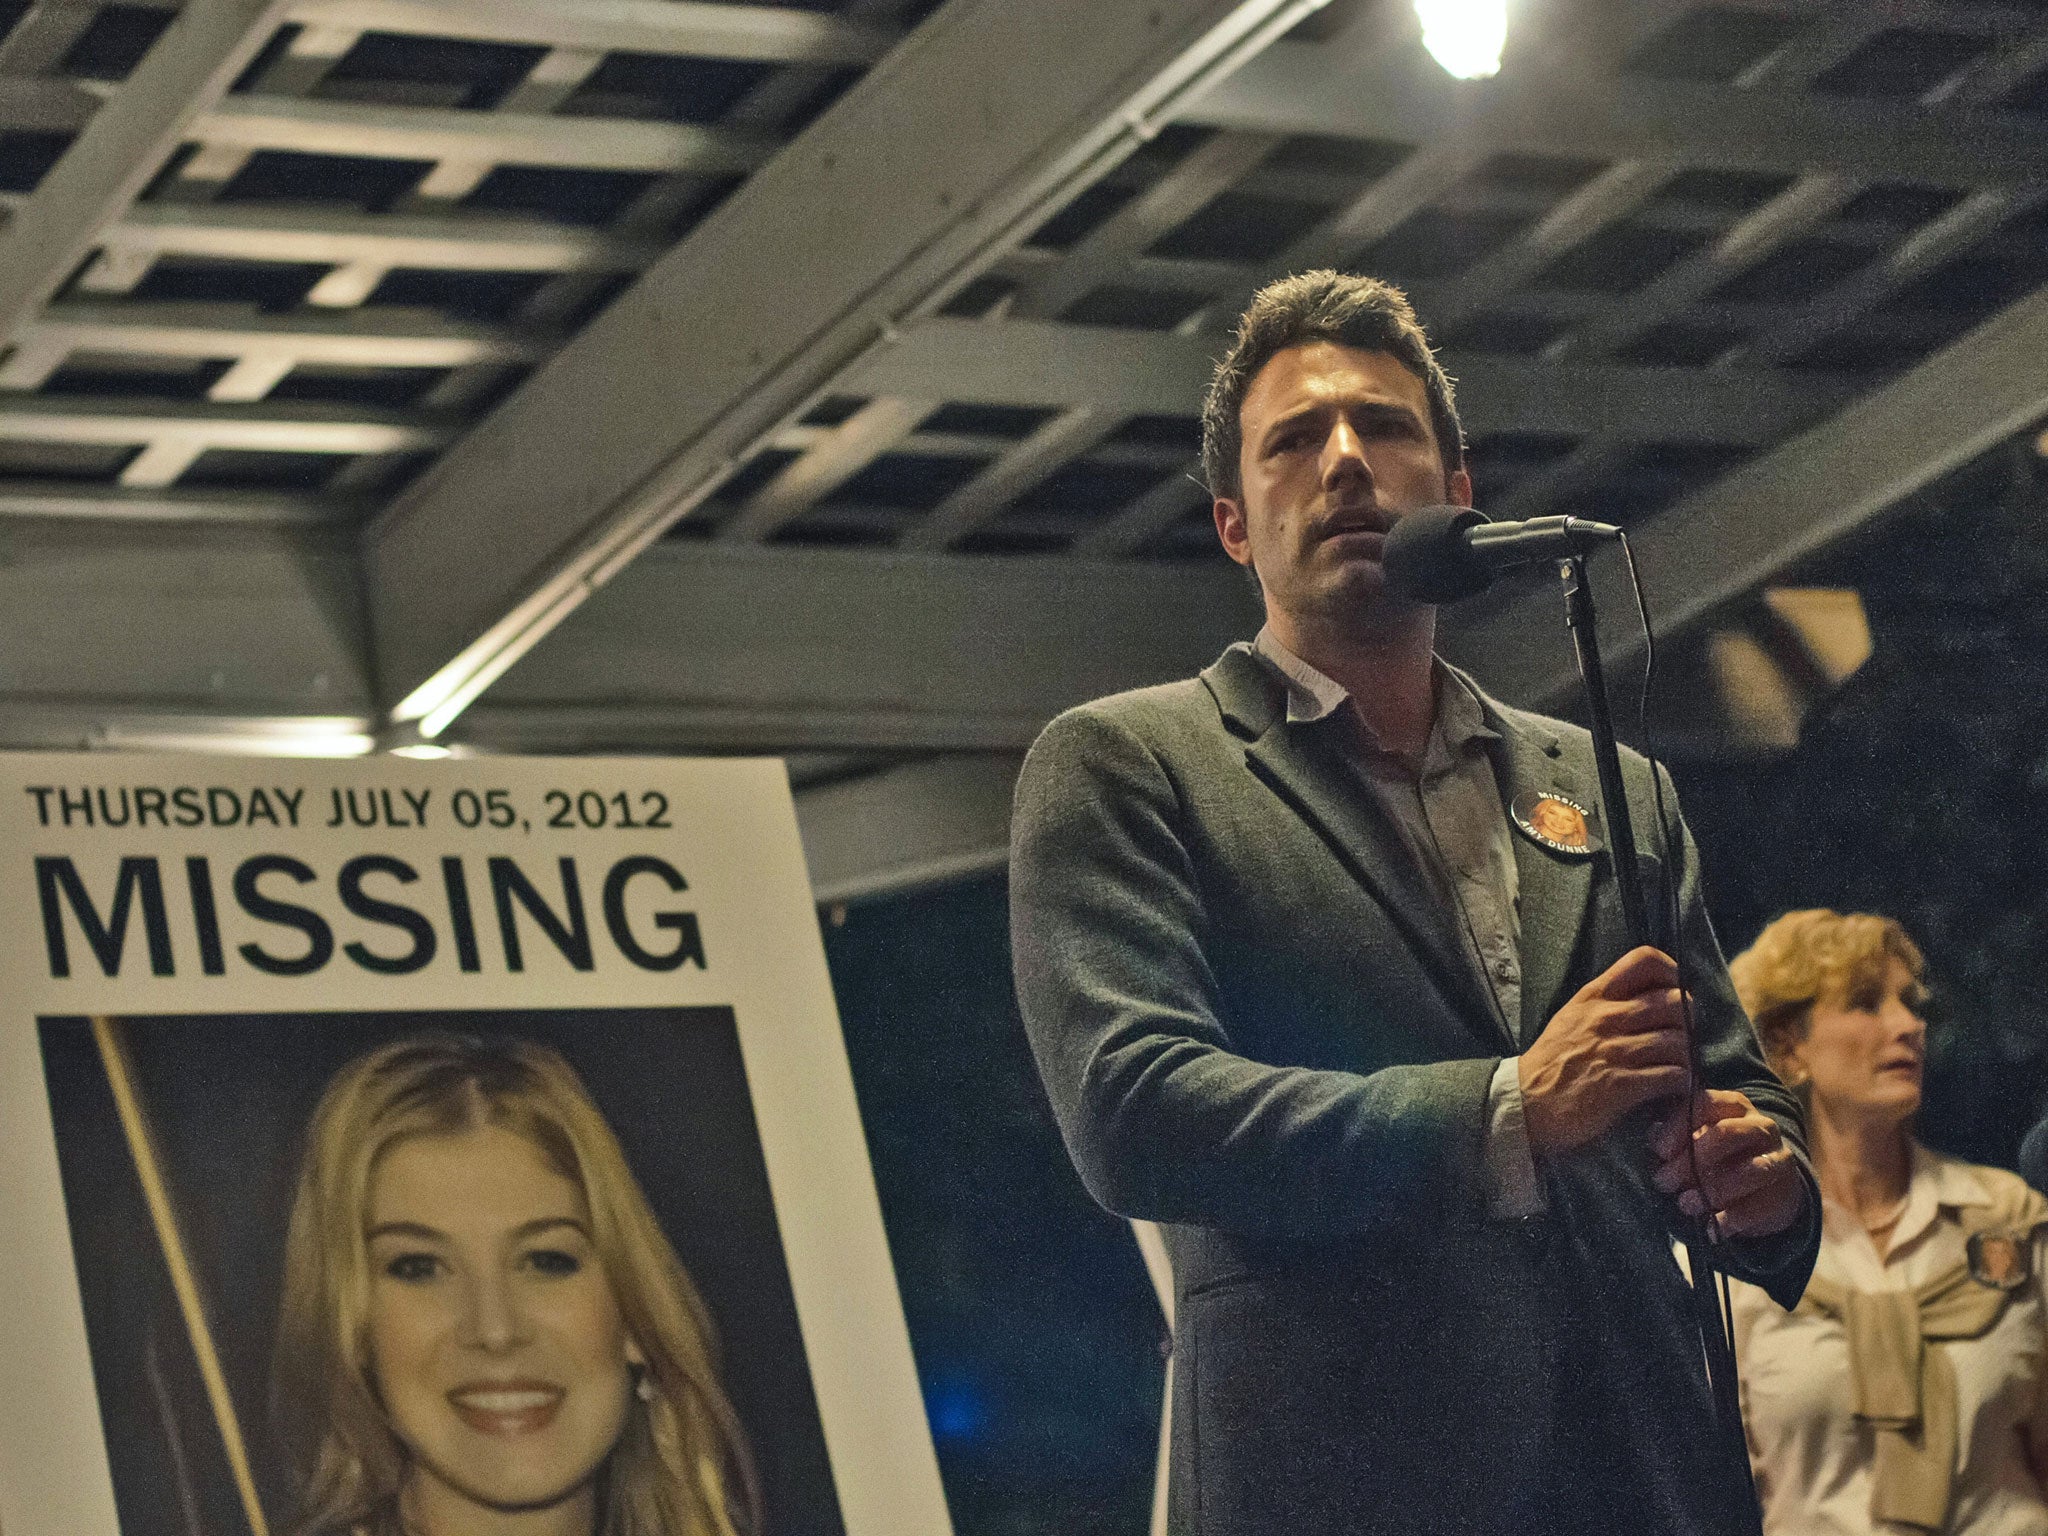 Real life Gone Girl stages own kidnapping to win back former lover The Independent The Independent pic pic